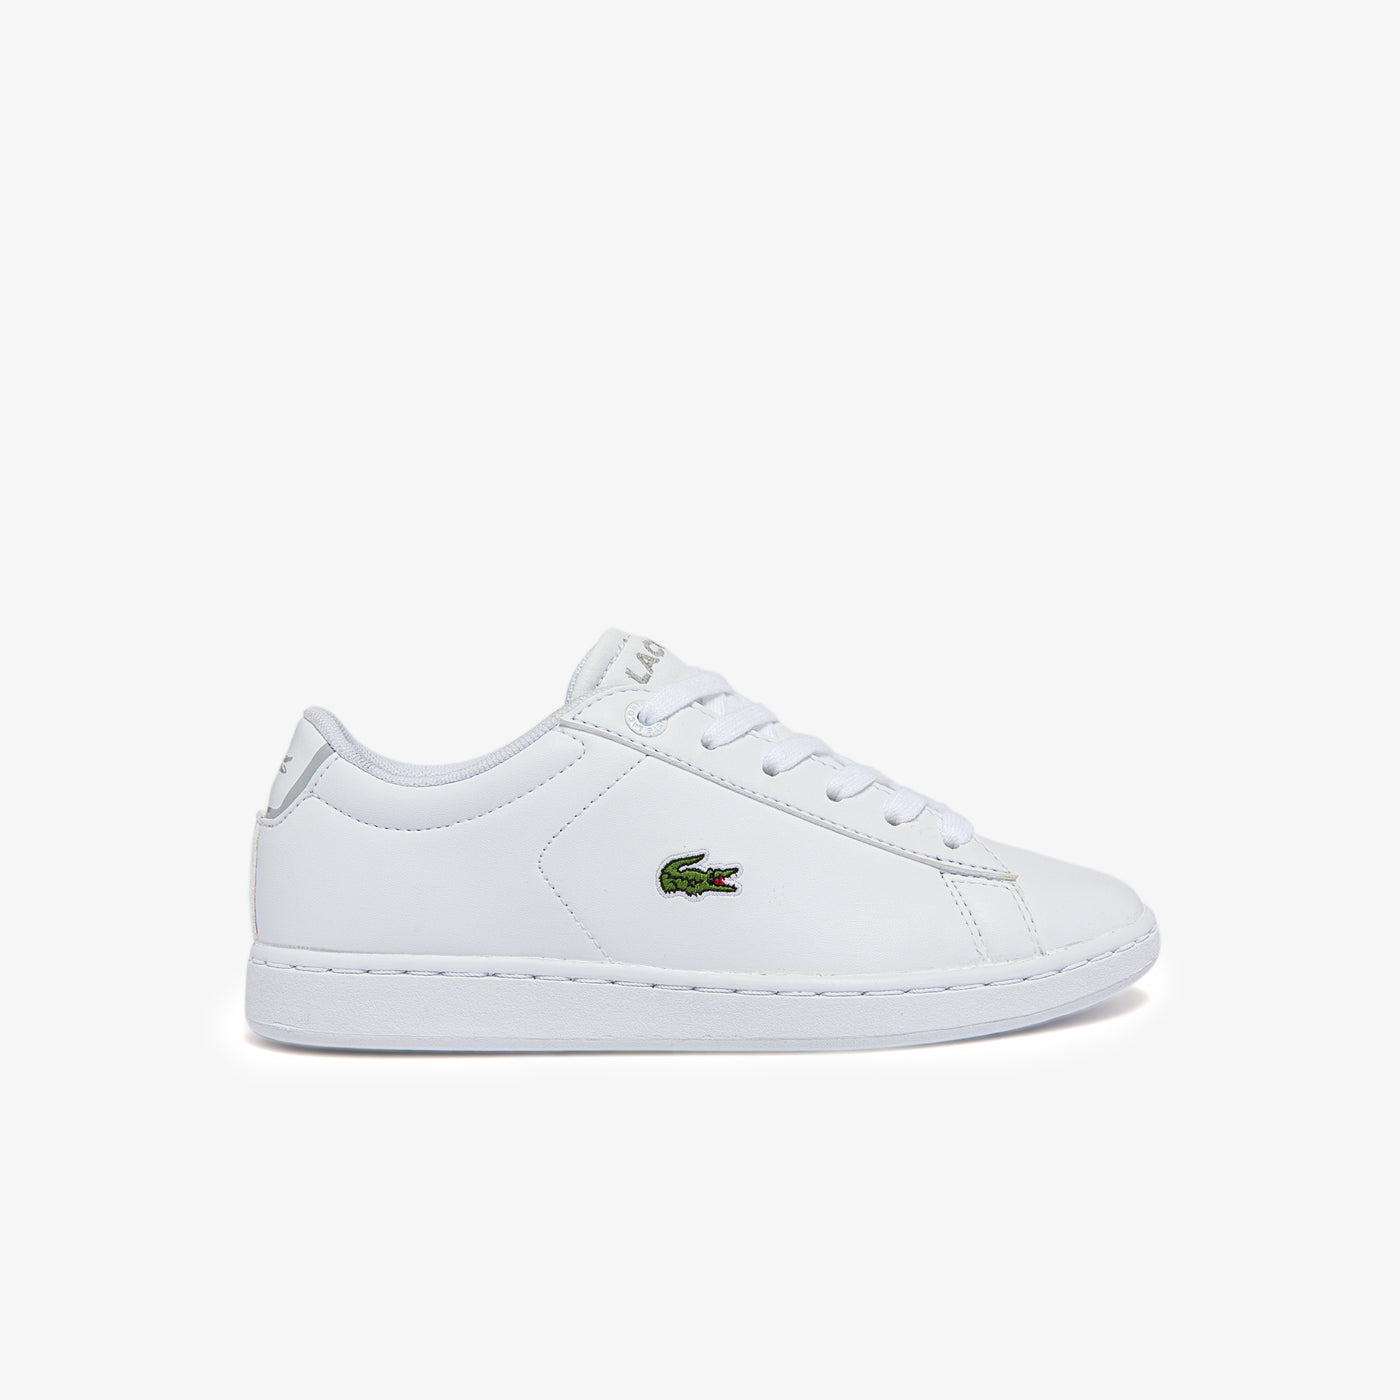 Shop The Latest Collection Of Lacoste Children'S Carnaby Evo Bl Synthetic Trainers - 41Suc000321G In Lebanon